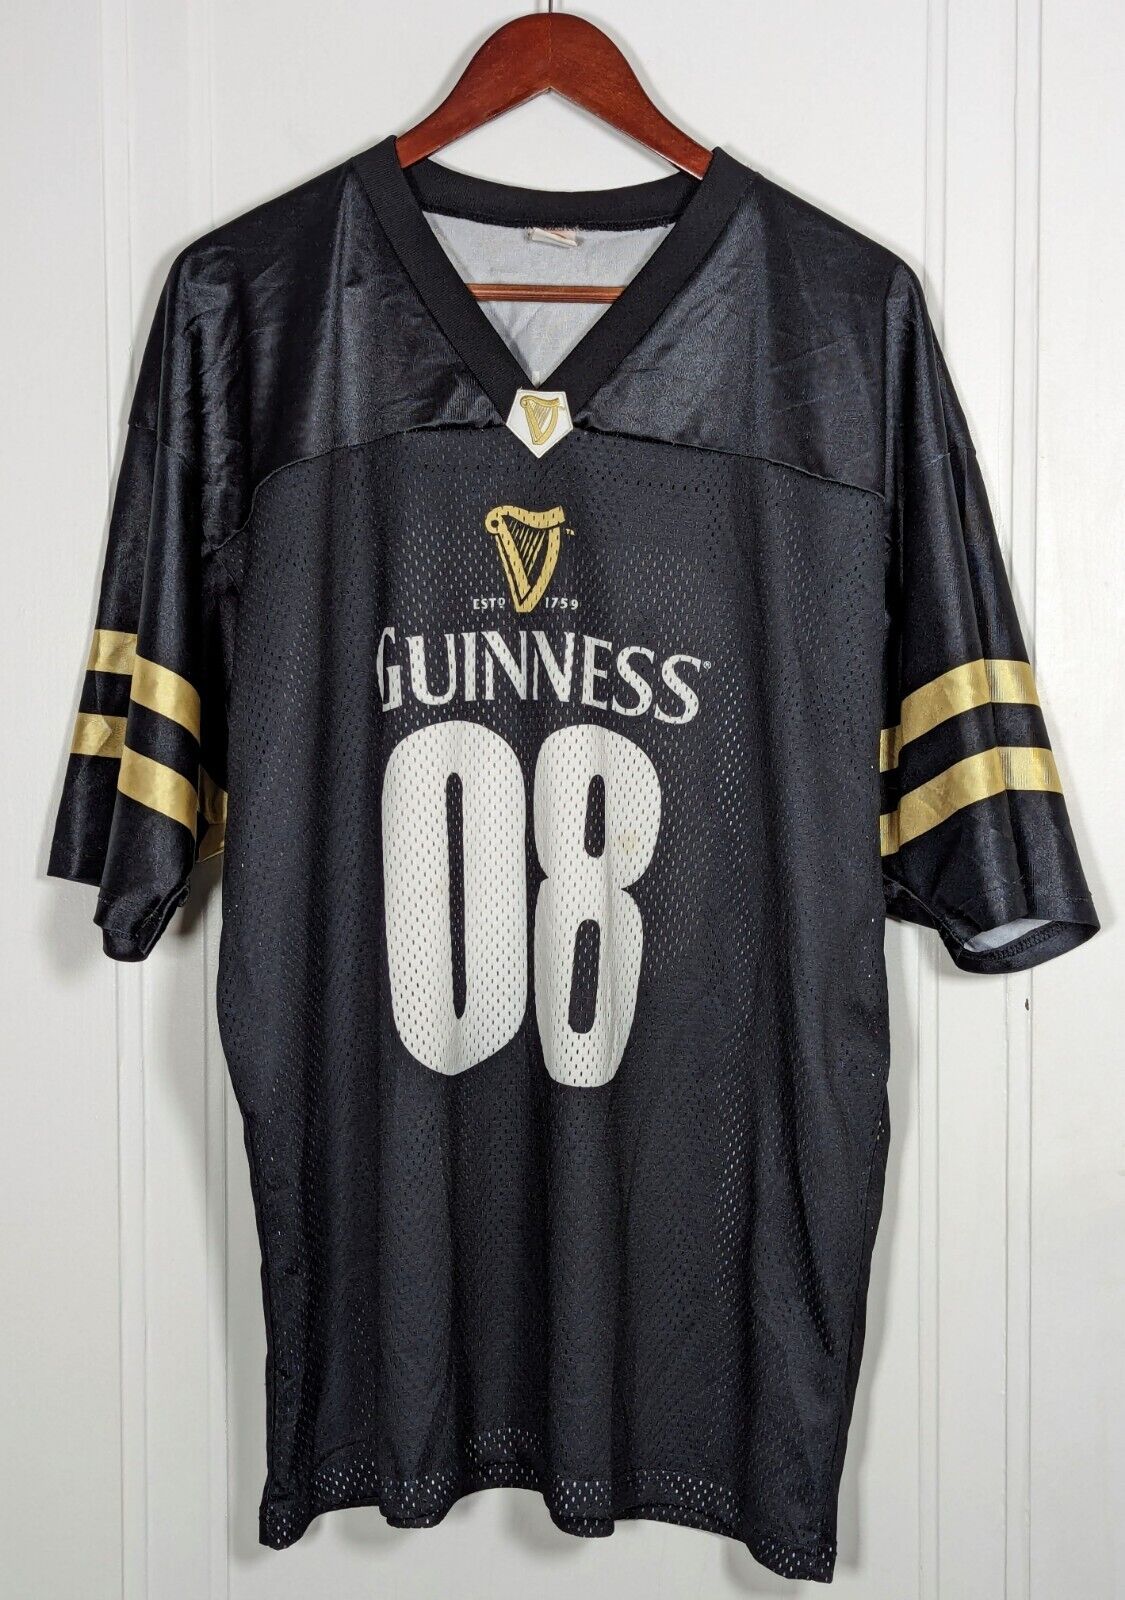 Guinness Beer #08 Football Jersey Black & Gold Size XL Adult Brewery Ireland